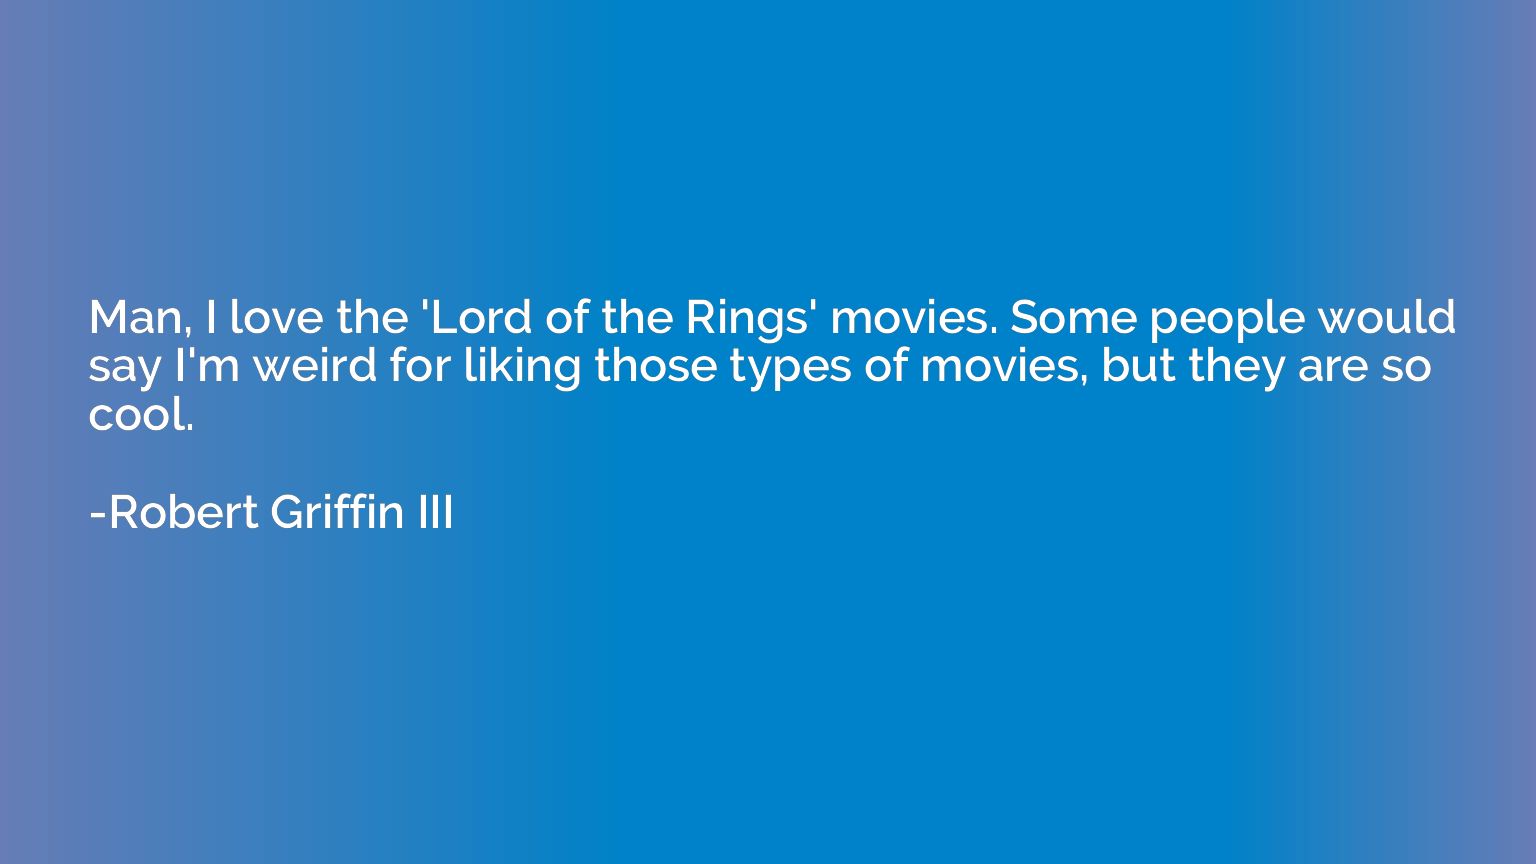 Man, I love the 'Lord of the Rings' movies. Some people woul